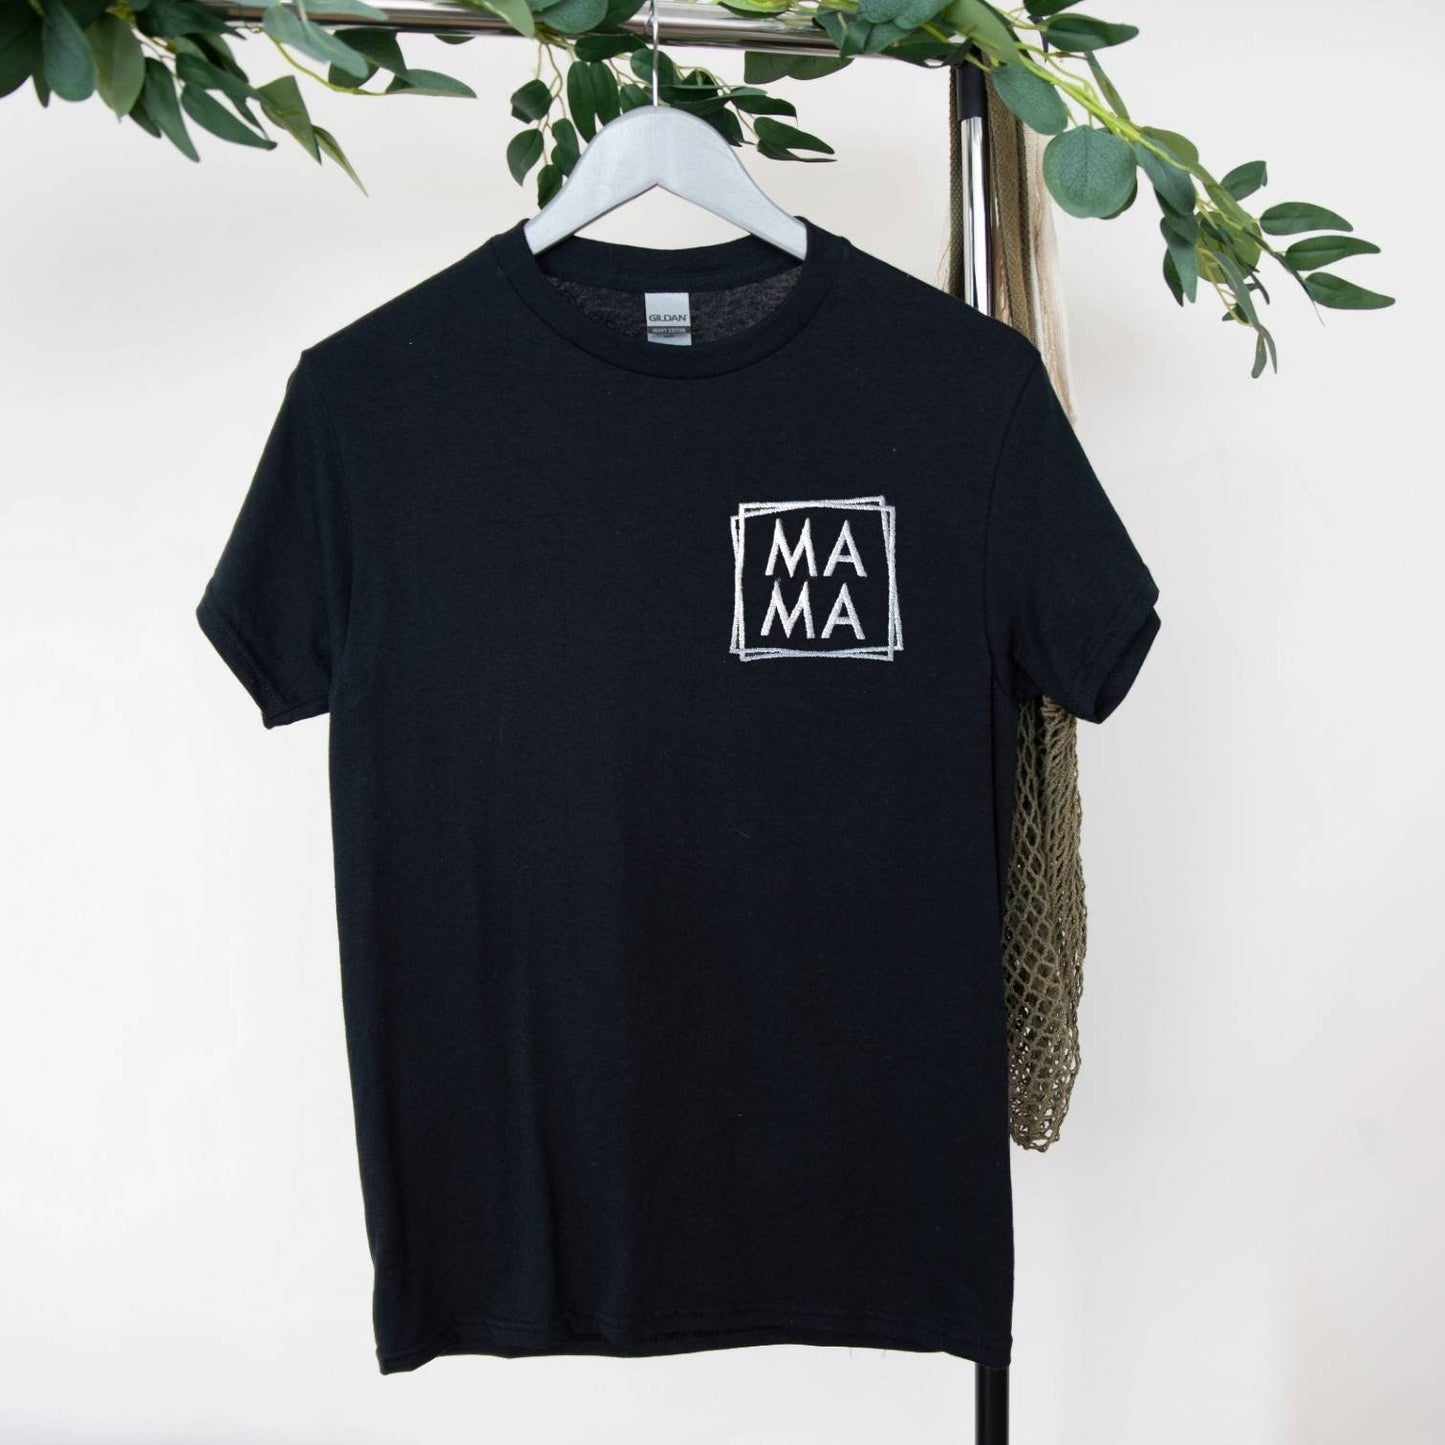 Minimalist mama embroidered T shirt. 100% cotton, mother's day gift